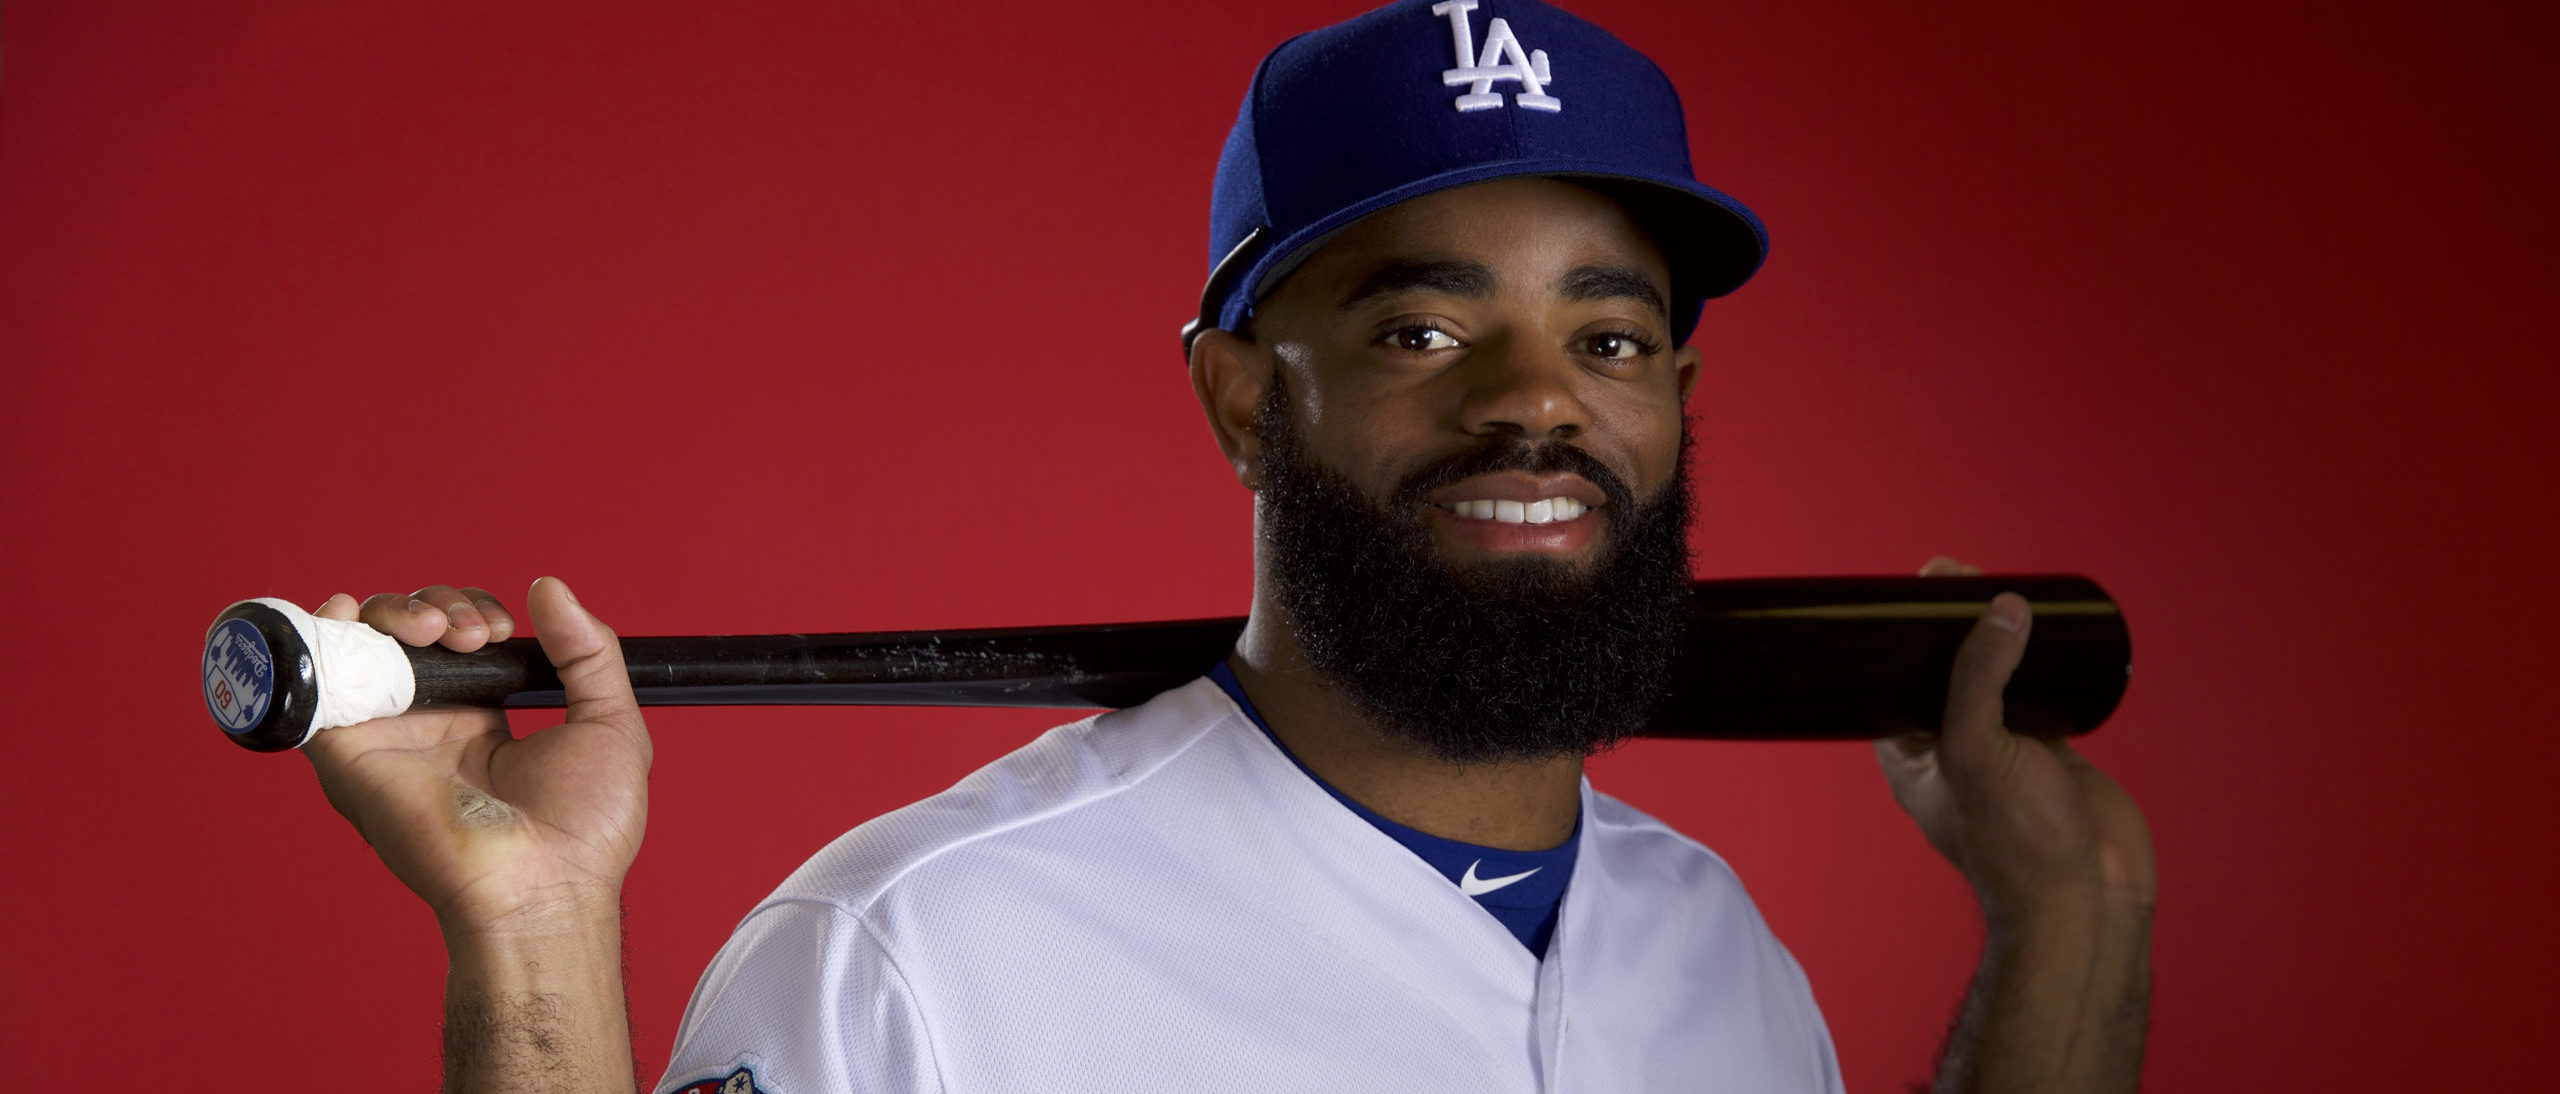 Talented but troubled Andrew Toles gets a second chance with